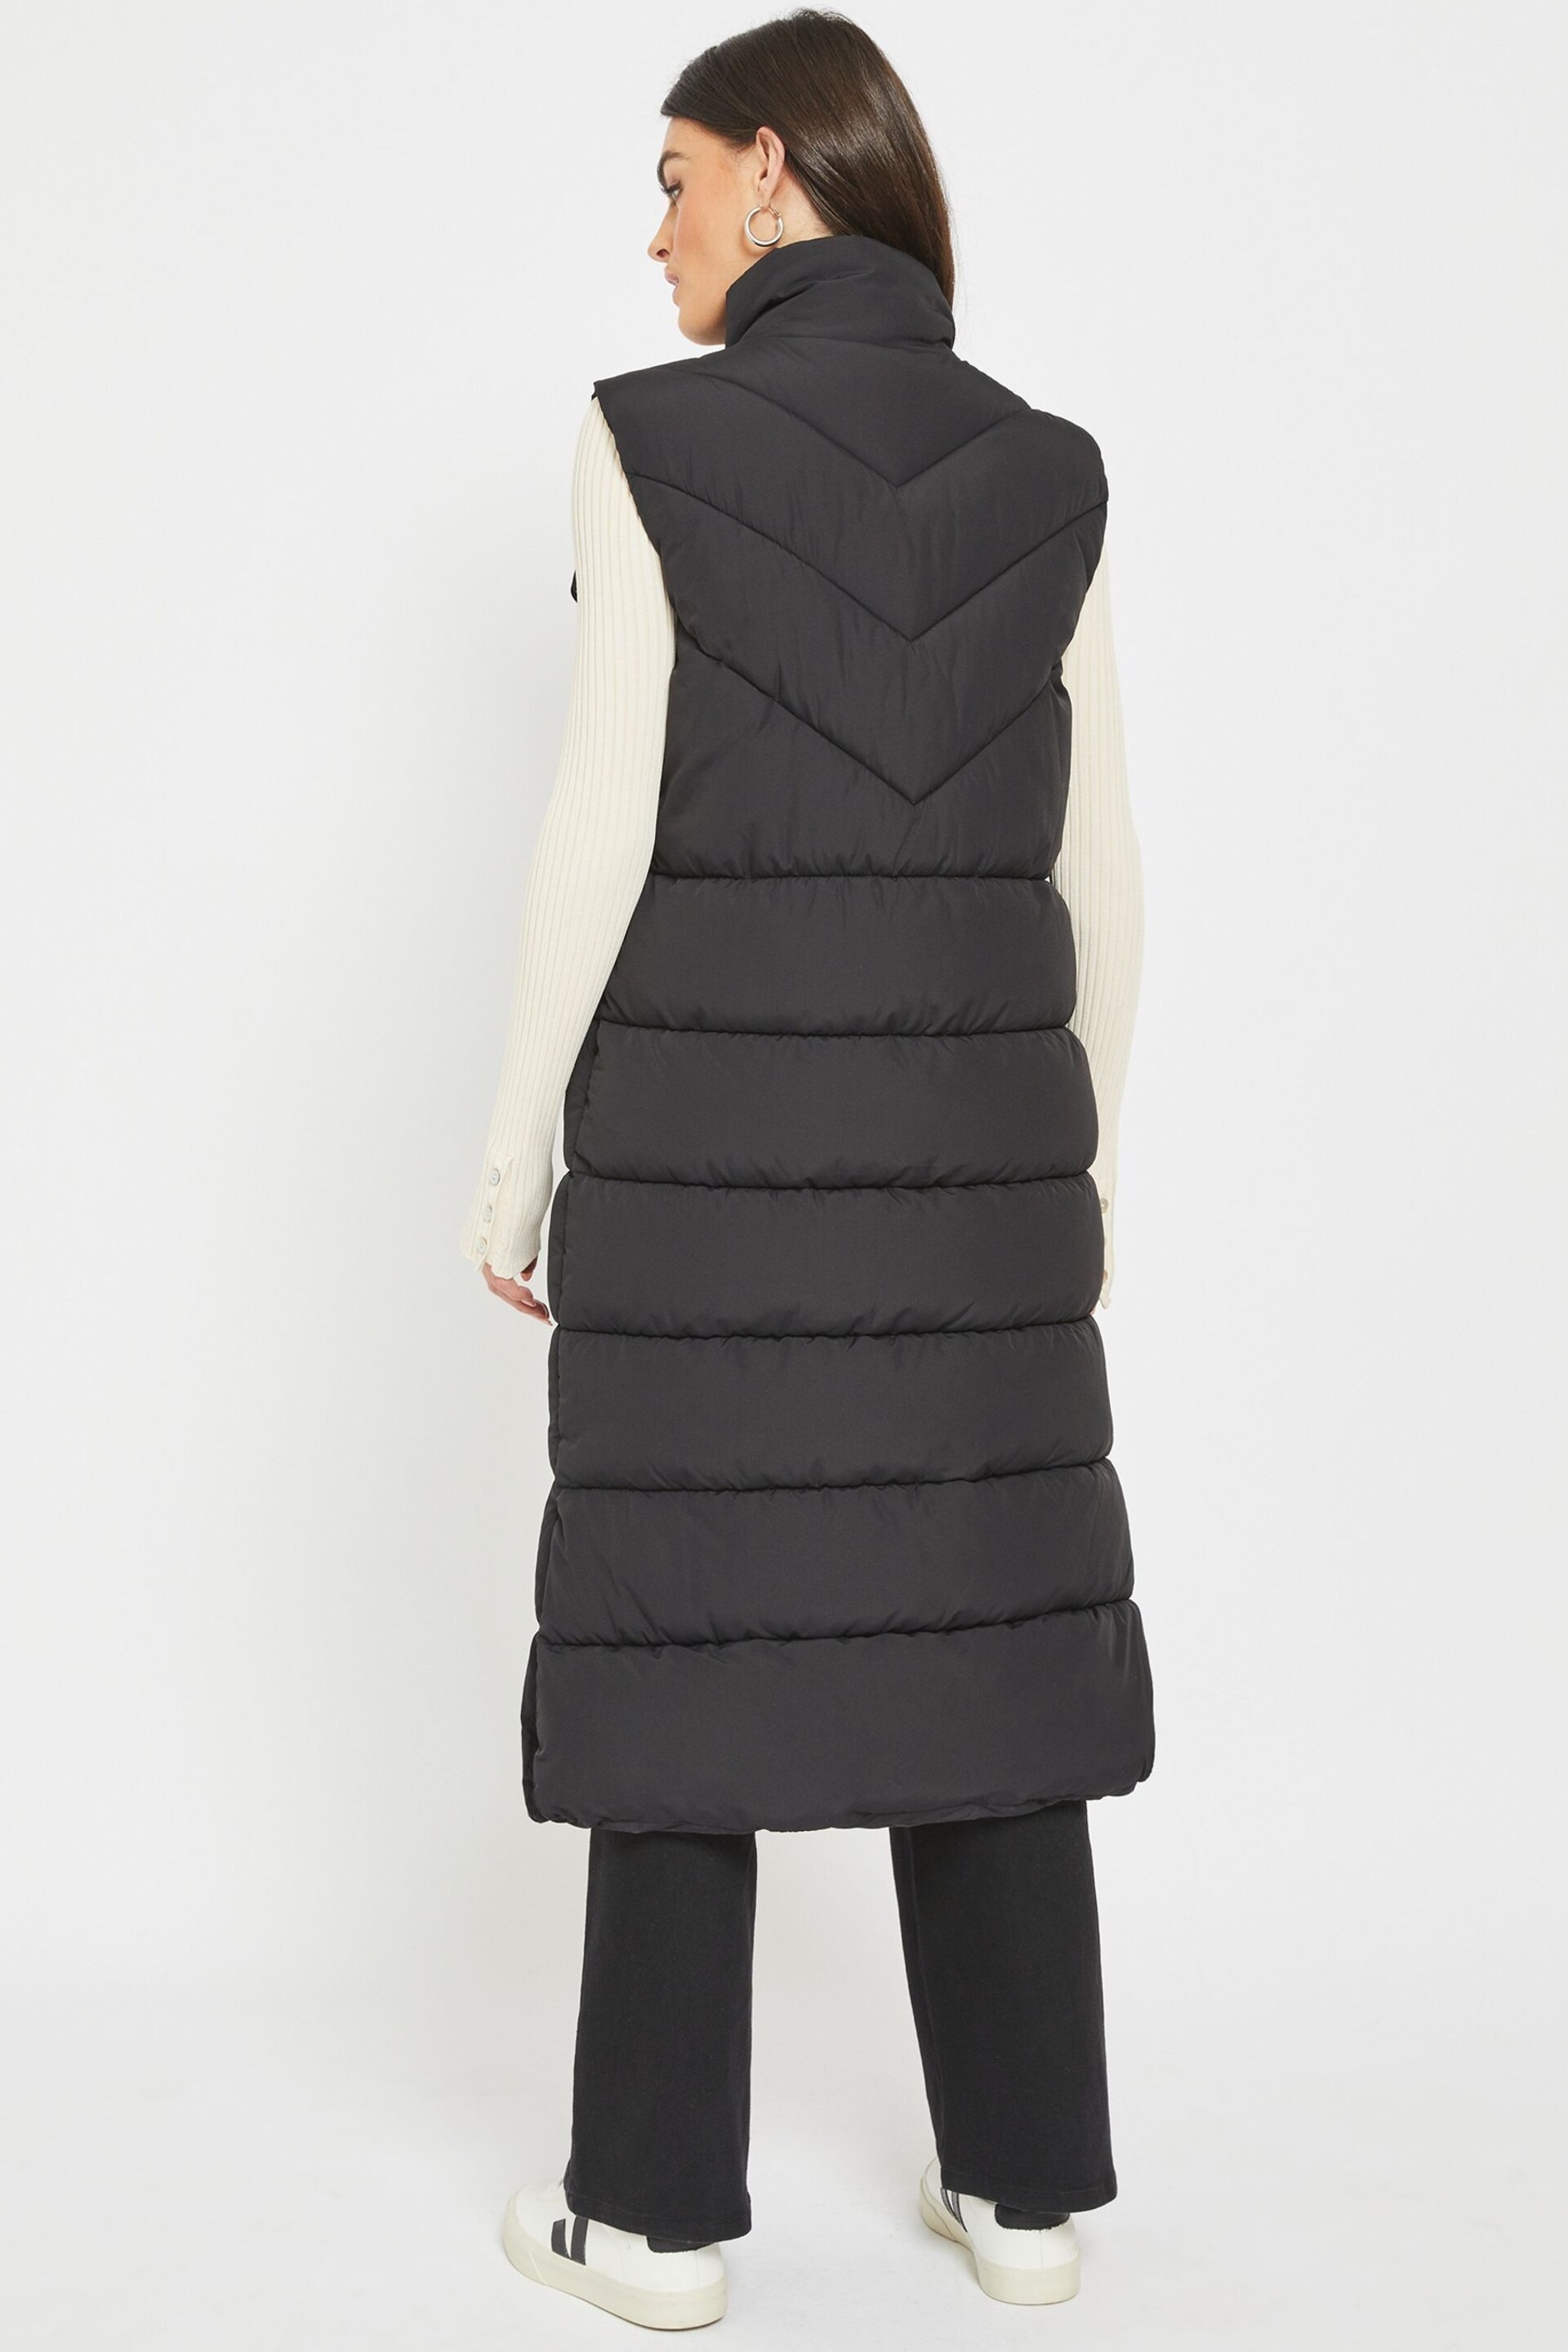 NOISY MAY Black Maxi Length Padded Quilted Collarless Gilet - Image 3 of 5